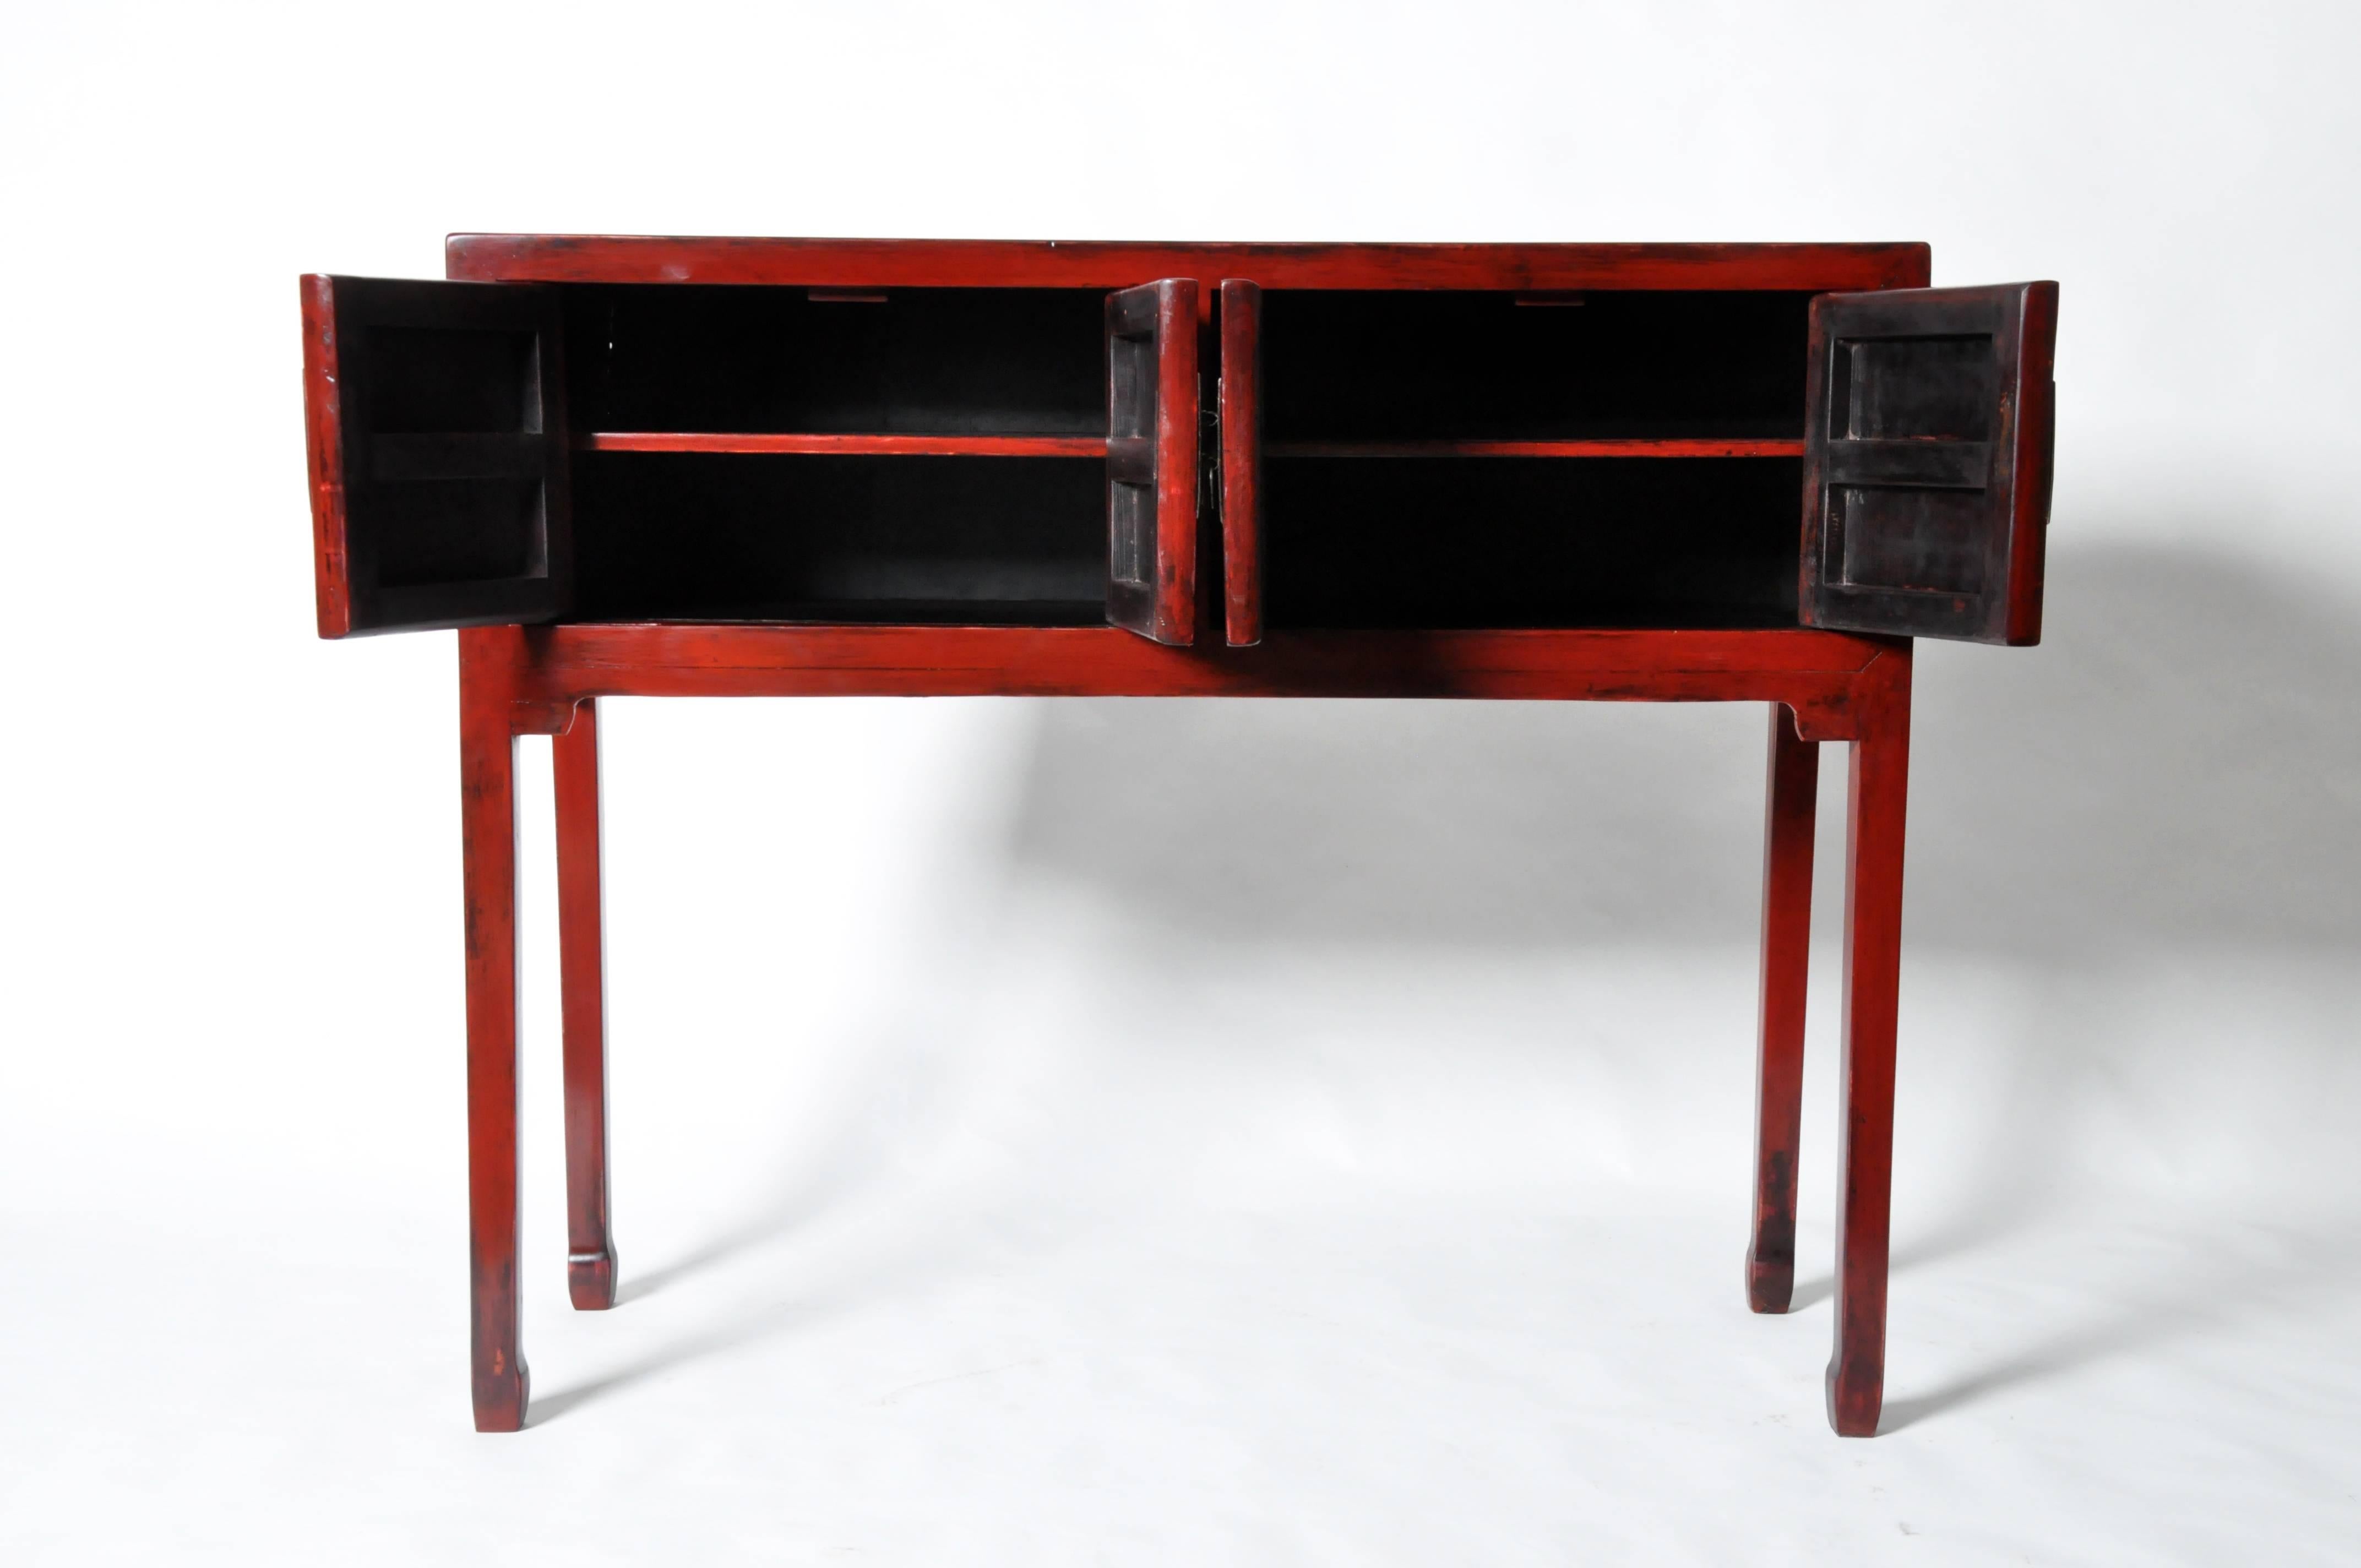 This Chinese red lacquered chest is made from elmwood and lacquer. It features two shelves for storage and has been fully restored.